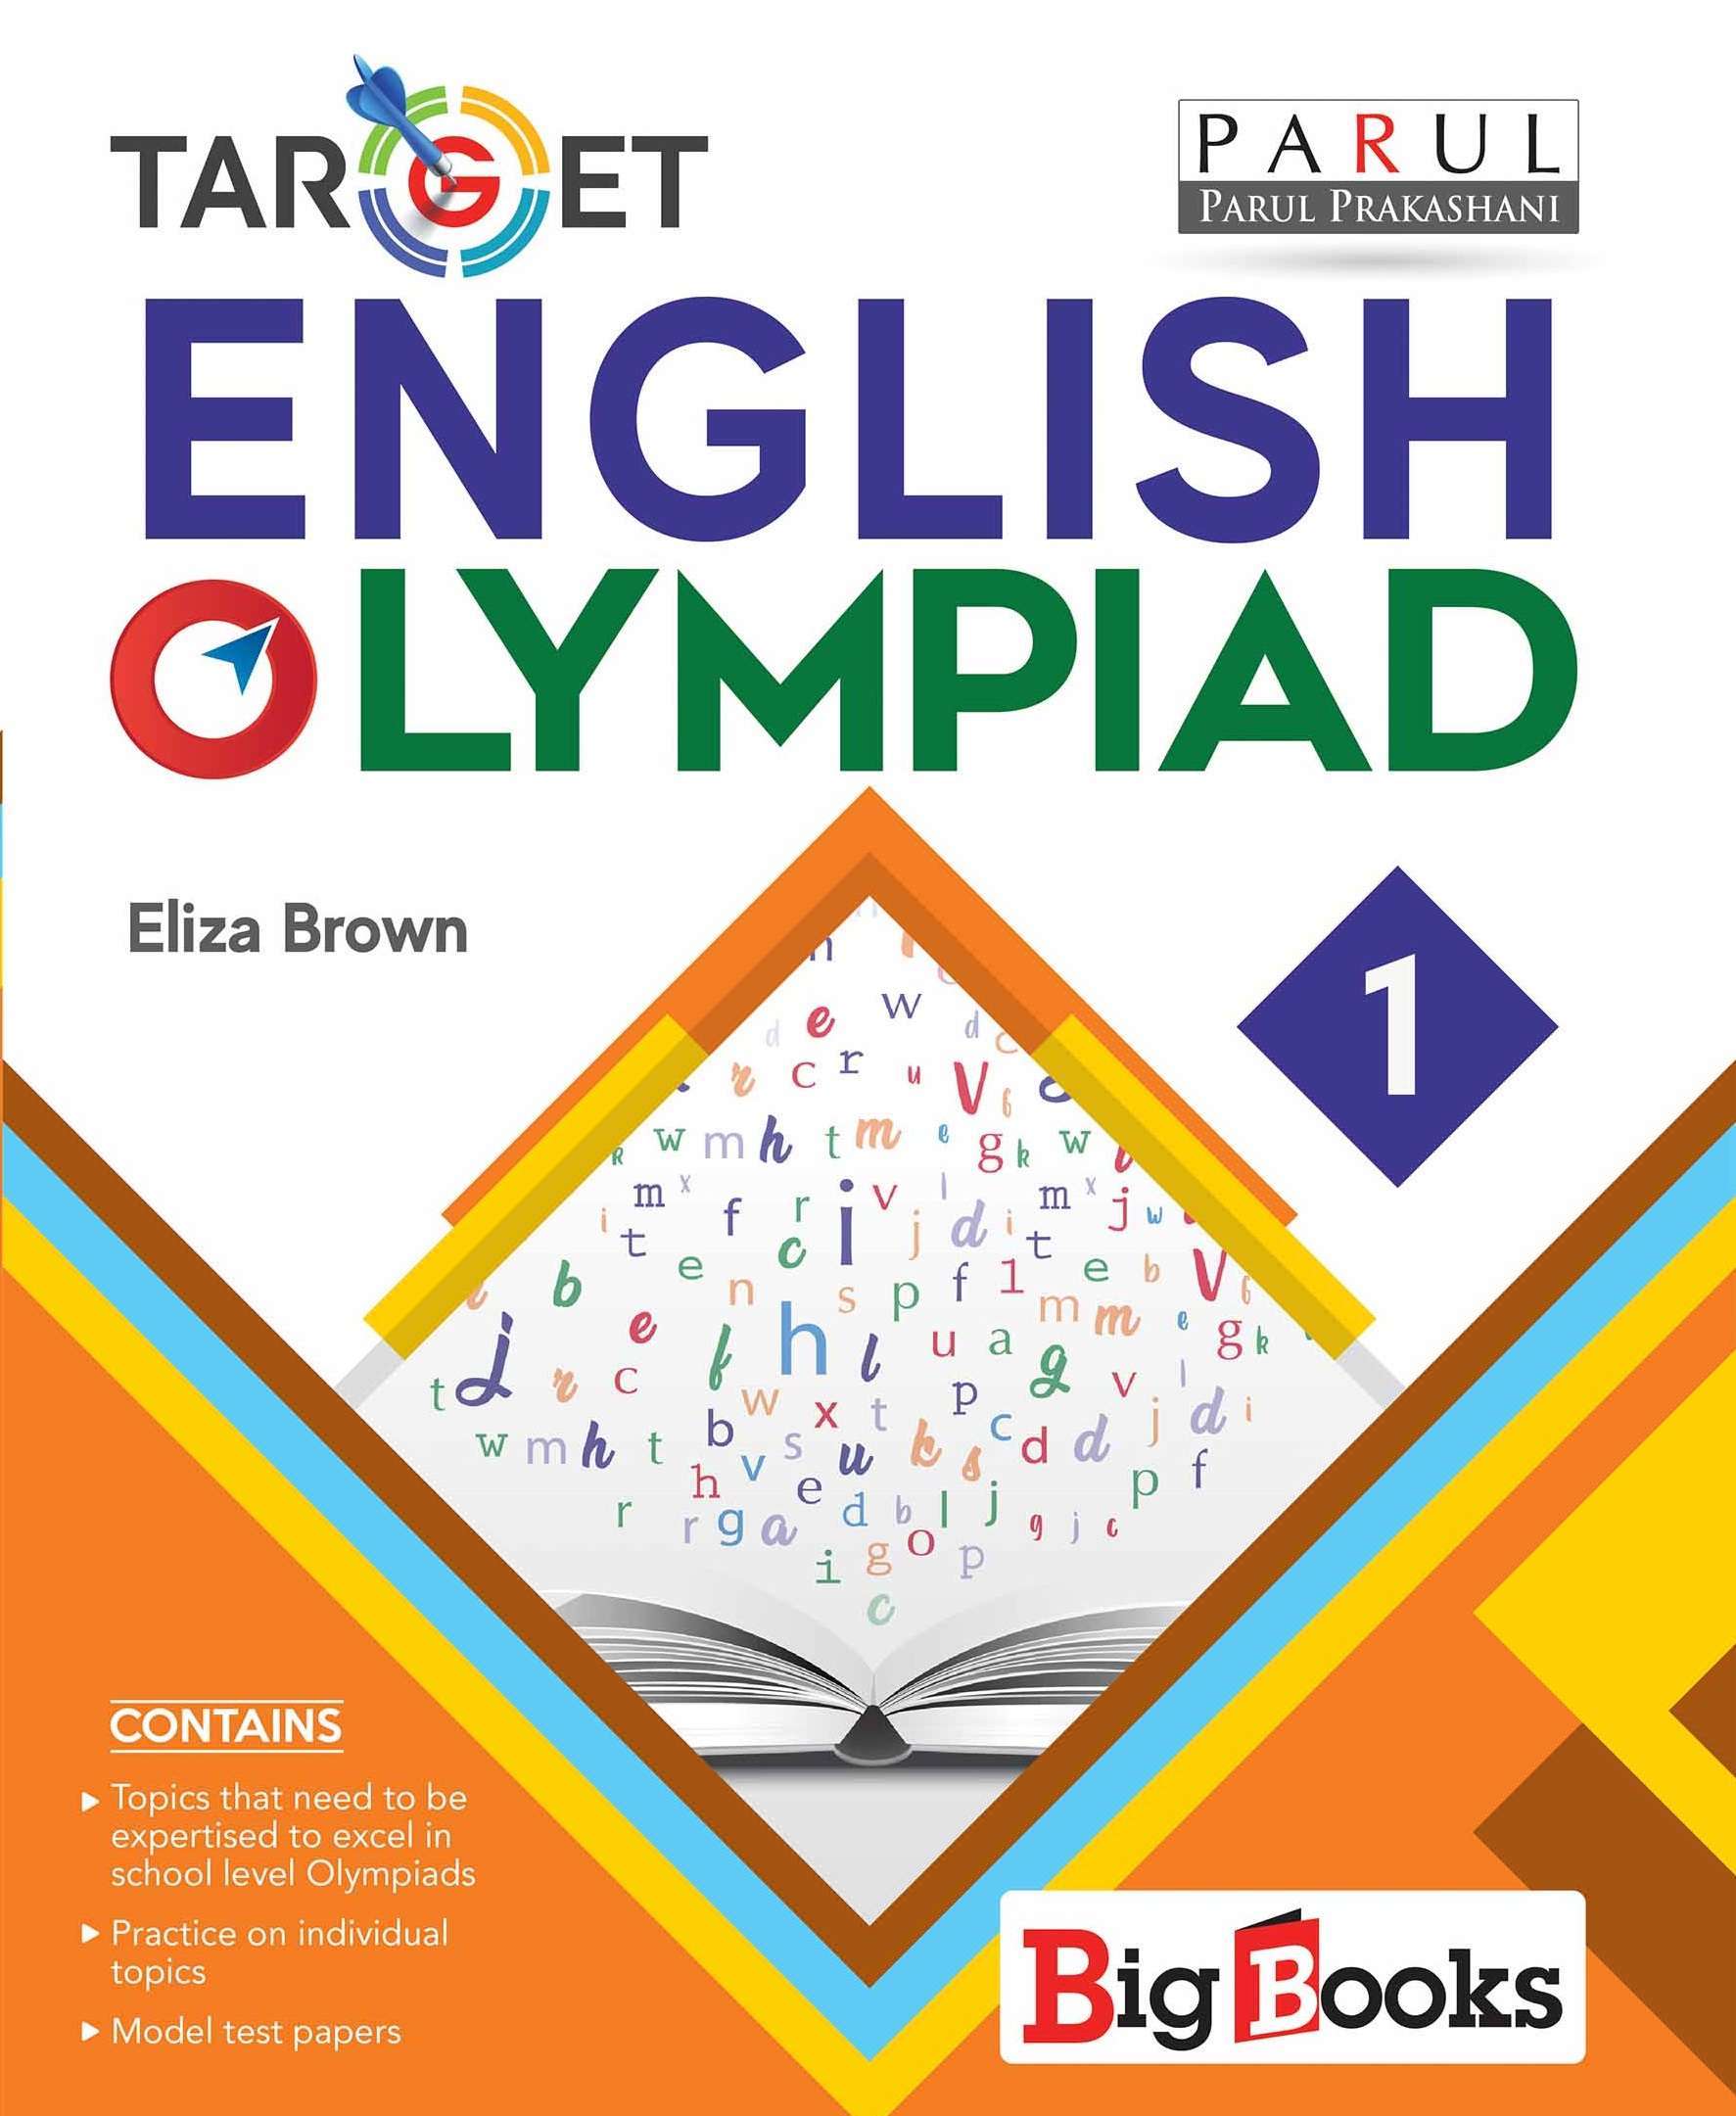 Buy English Olympiad book for 1